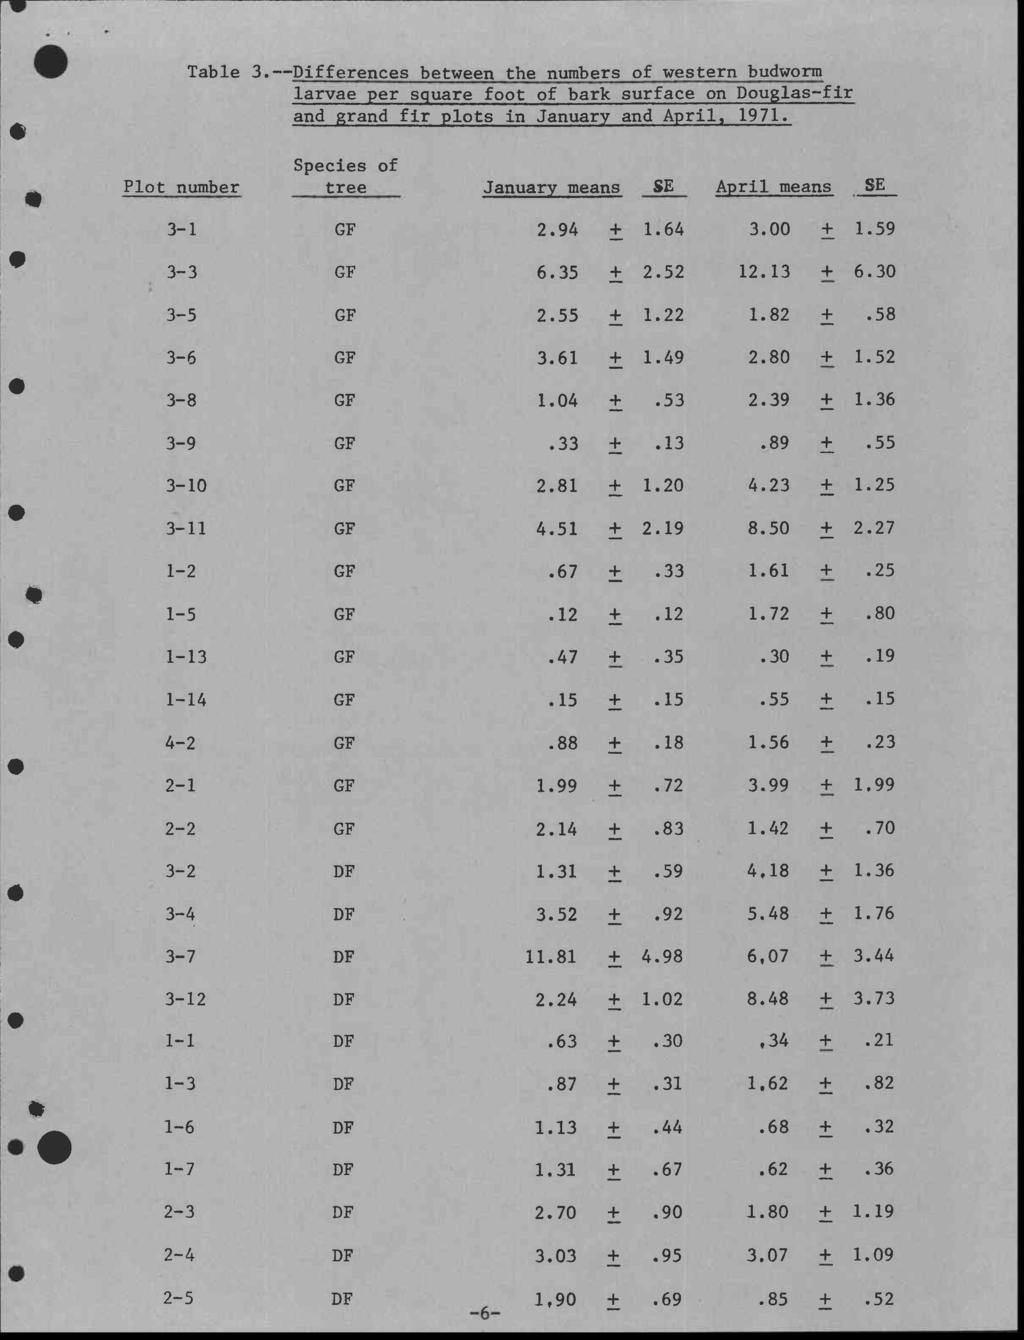 Table 3.--Differences between the numbers of western budworm larvae per square foot of bark surface on Douglas-fir and grand fir plots in January and April, 1971.